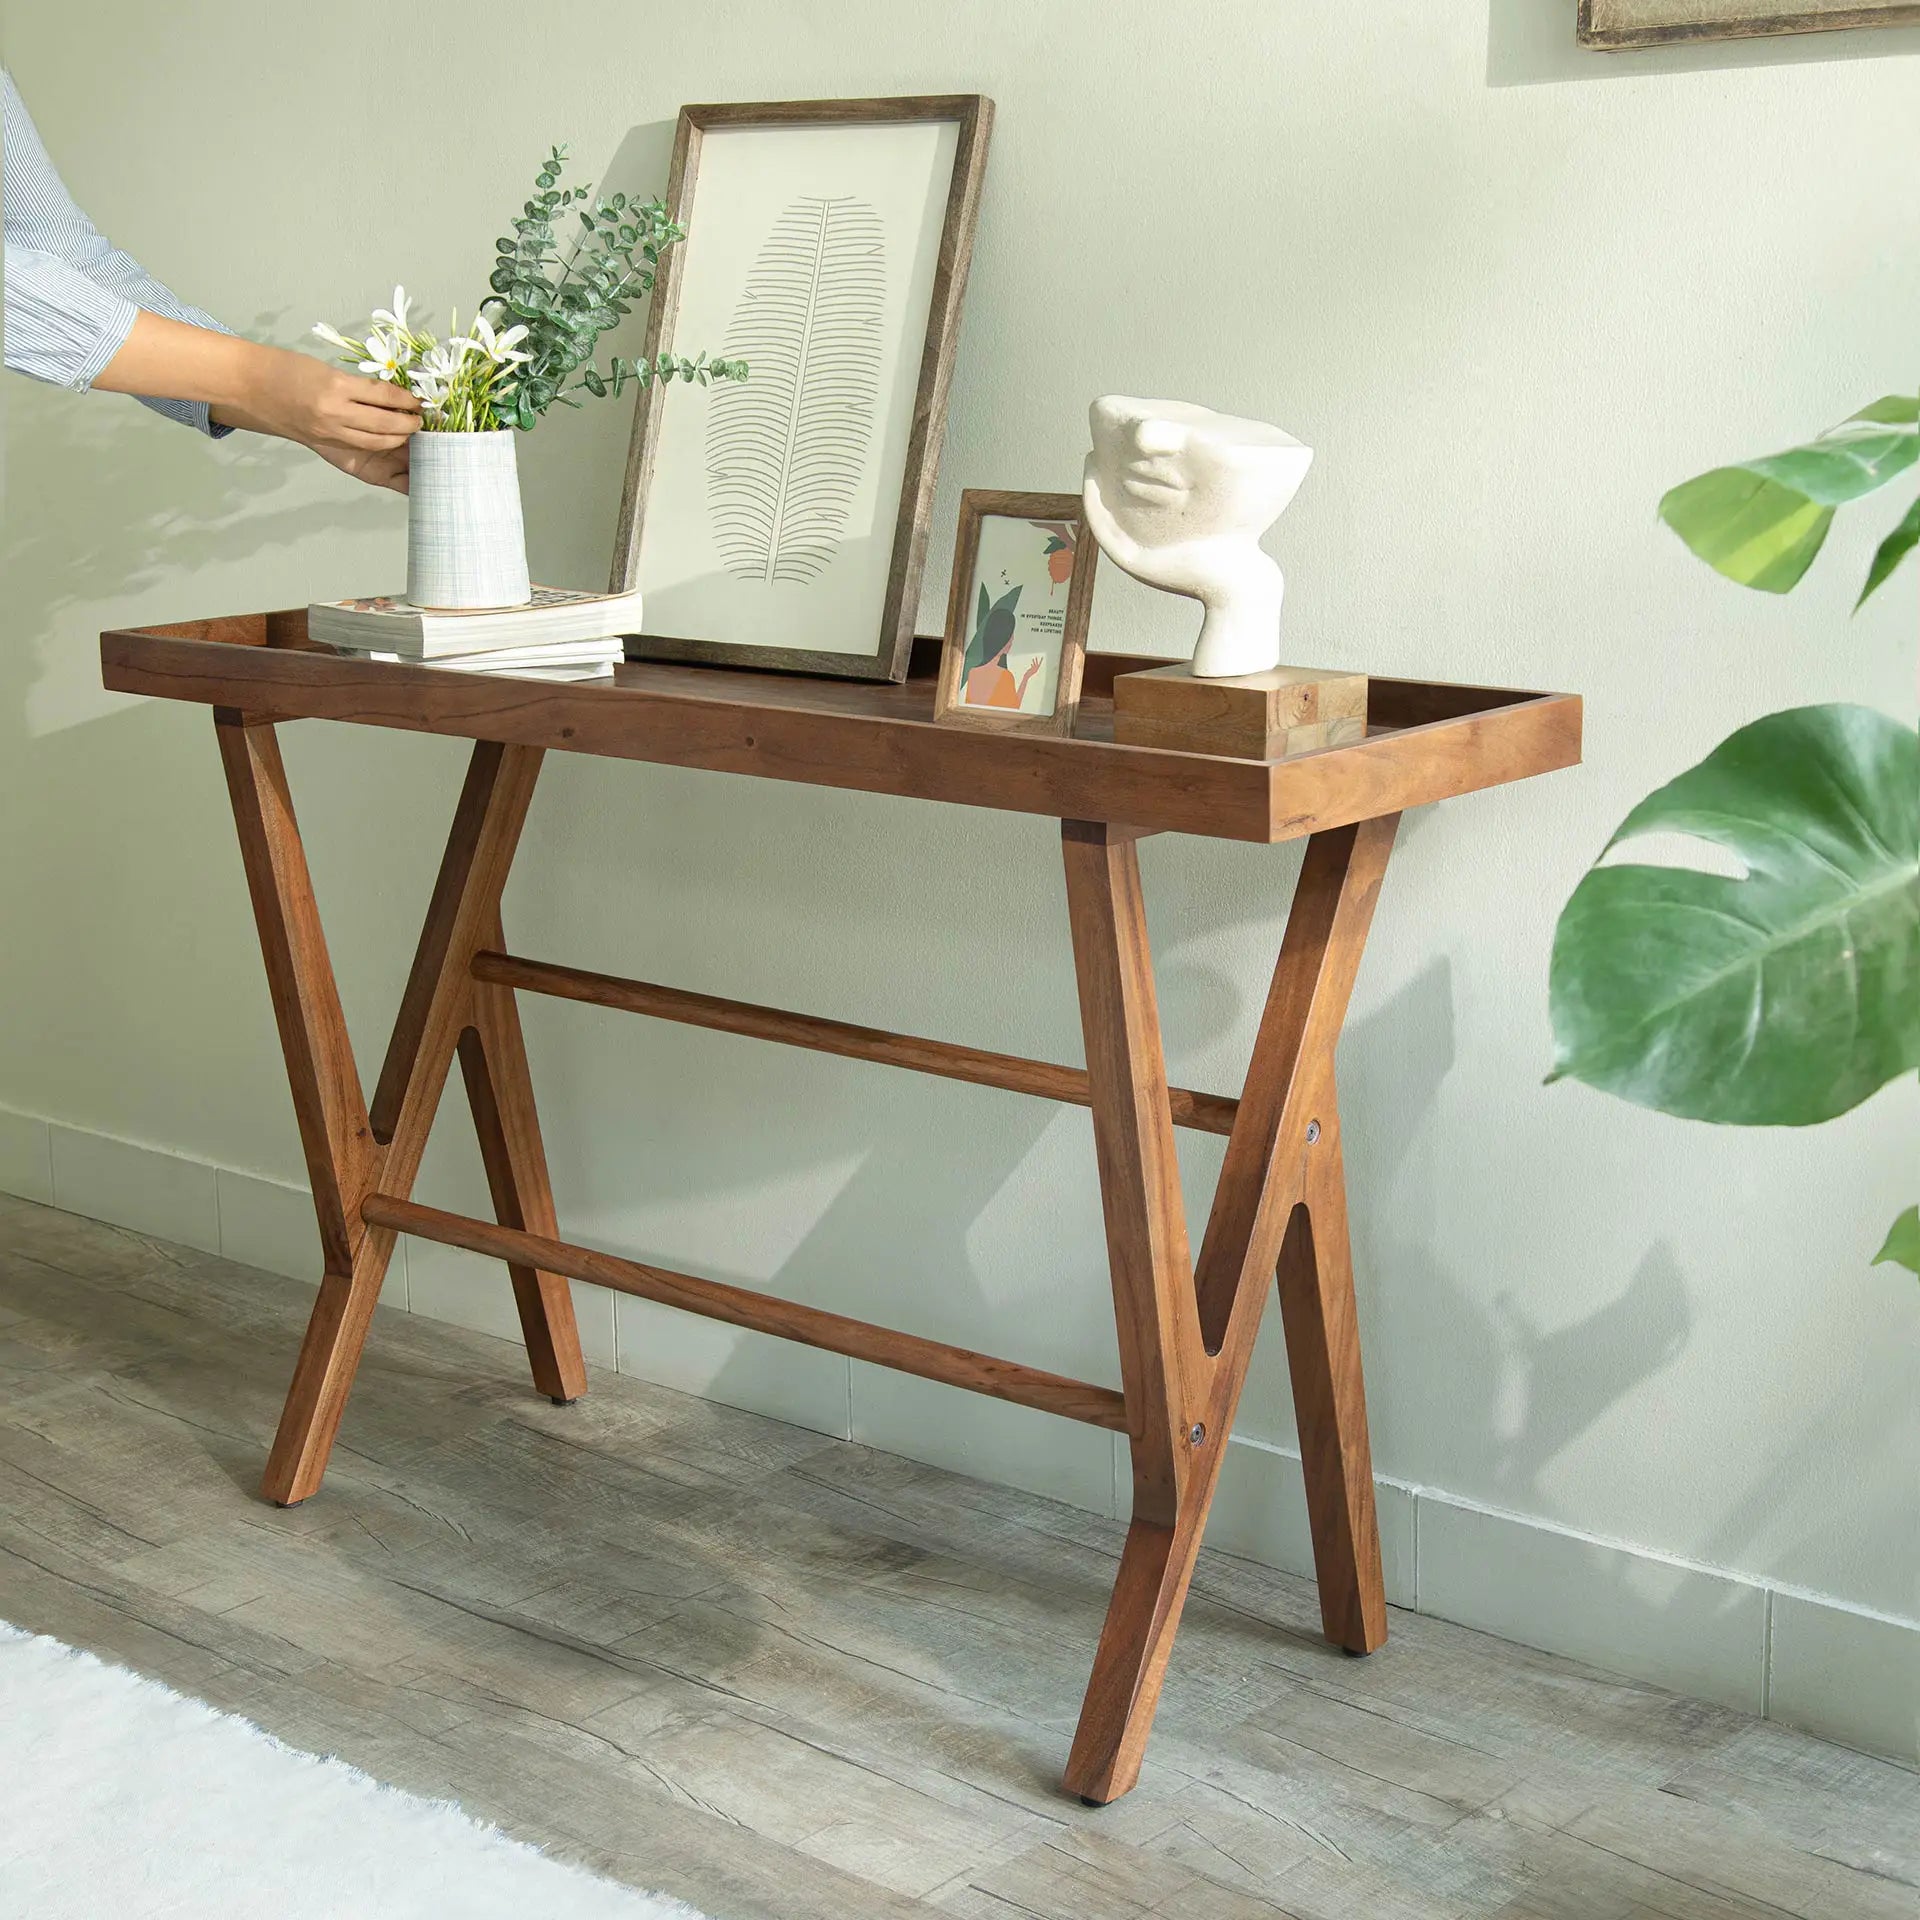 Kayra Ready-to-Assemble Console Table